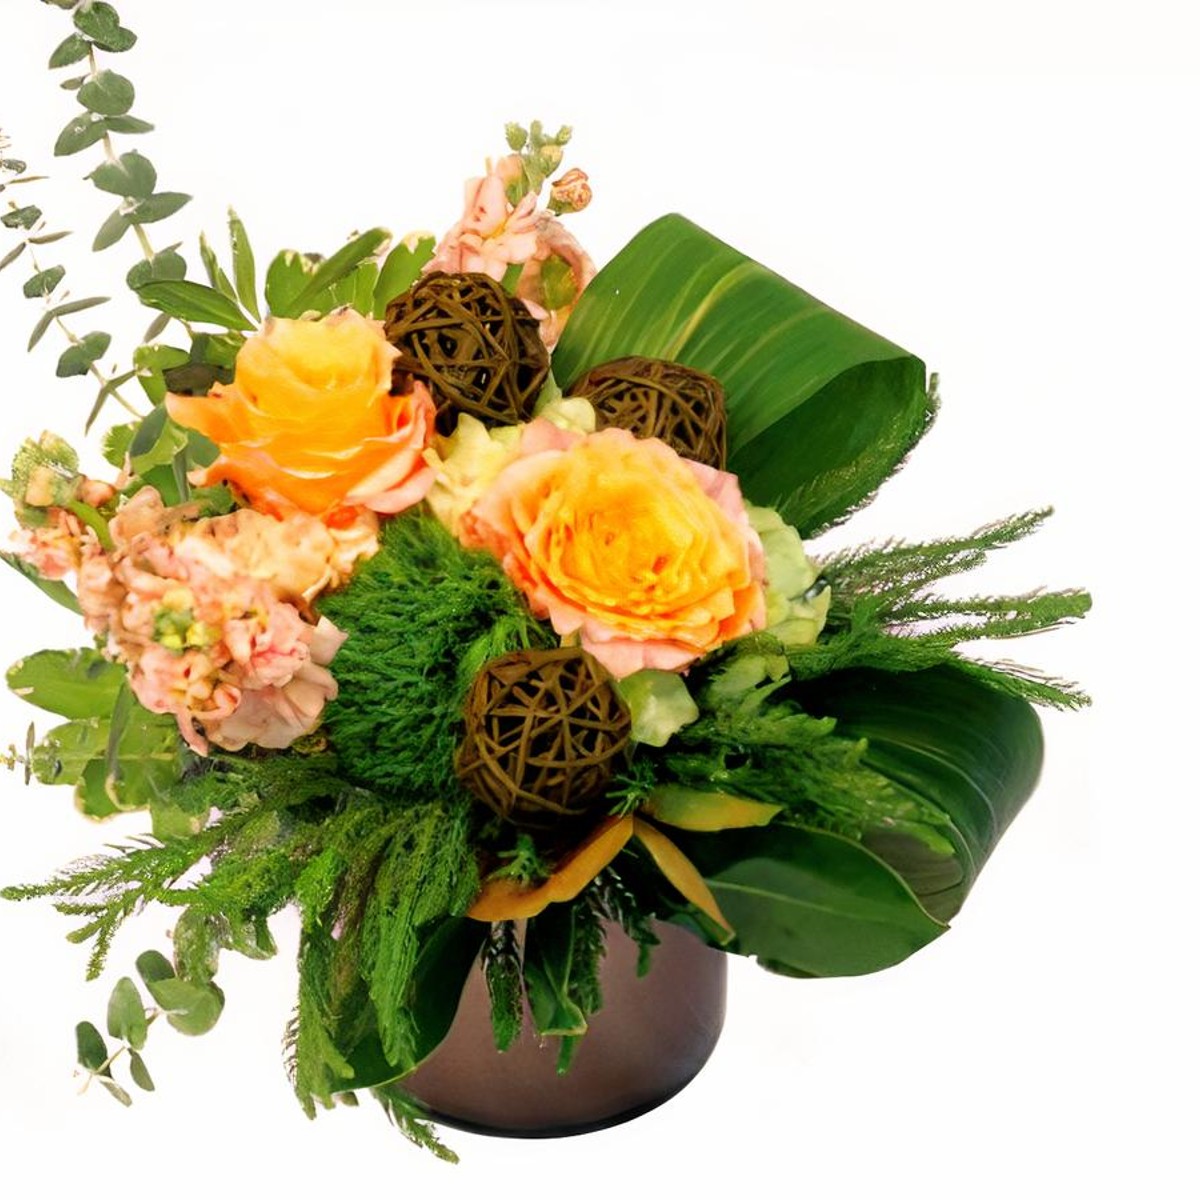 Sarahphims offers floral design services in Frisco